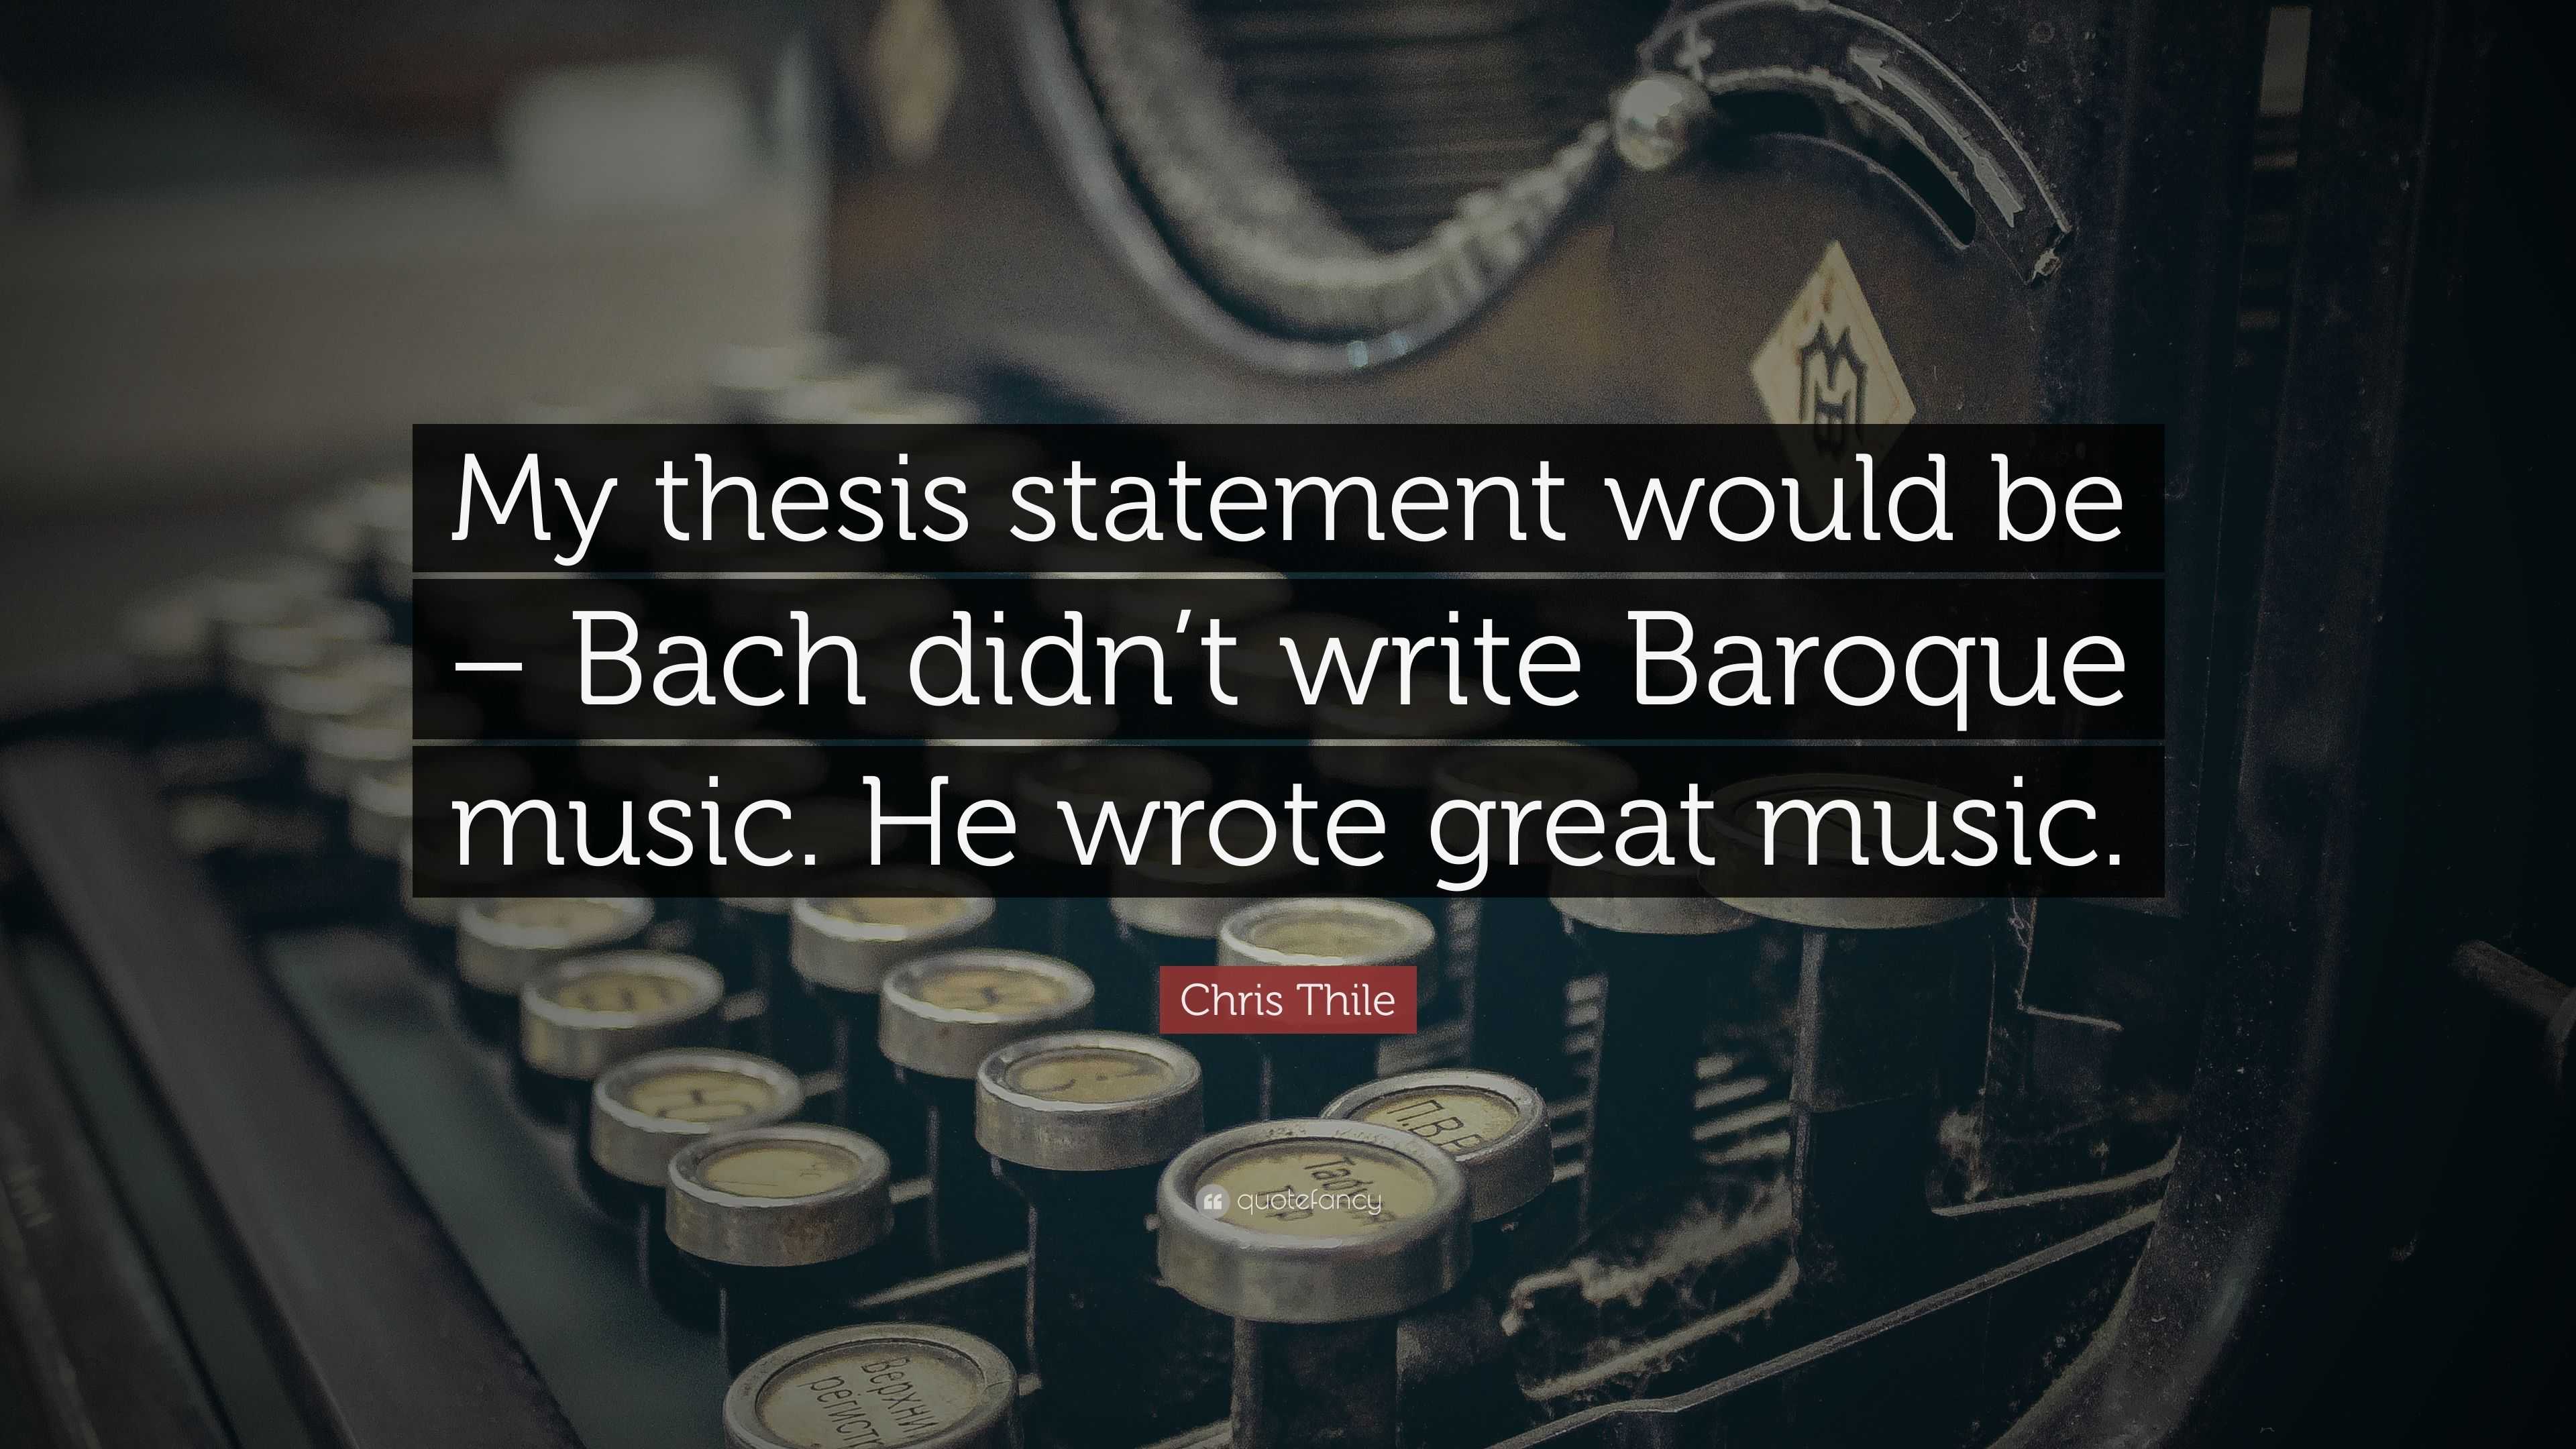 a thesis statement about music